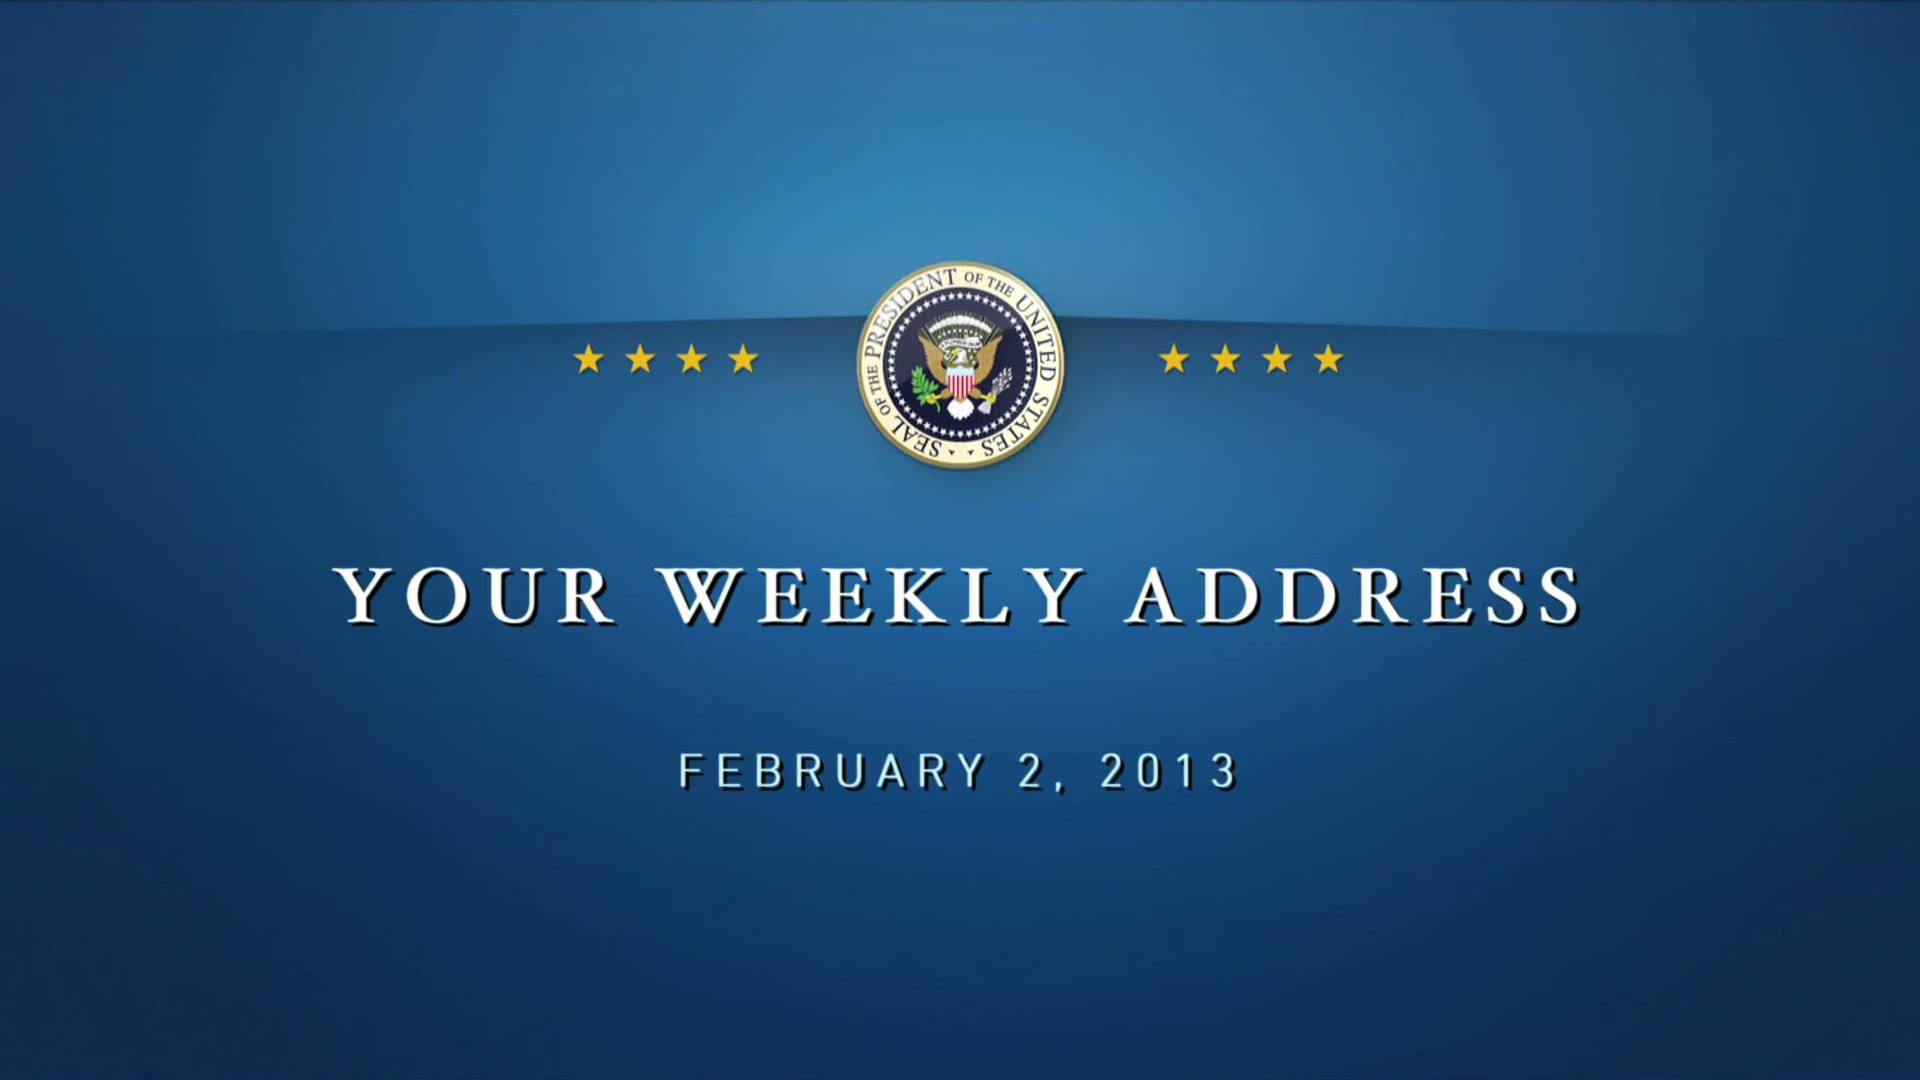 President's Weekly Address: A Balanced Approach to Growing the Economy.